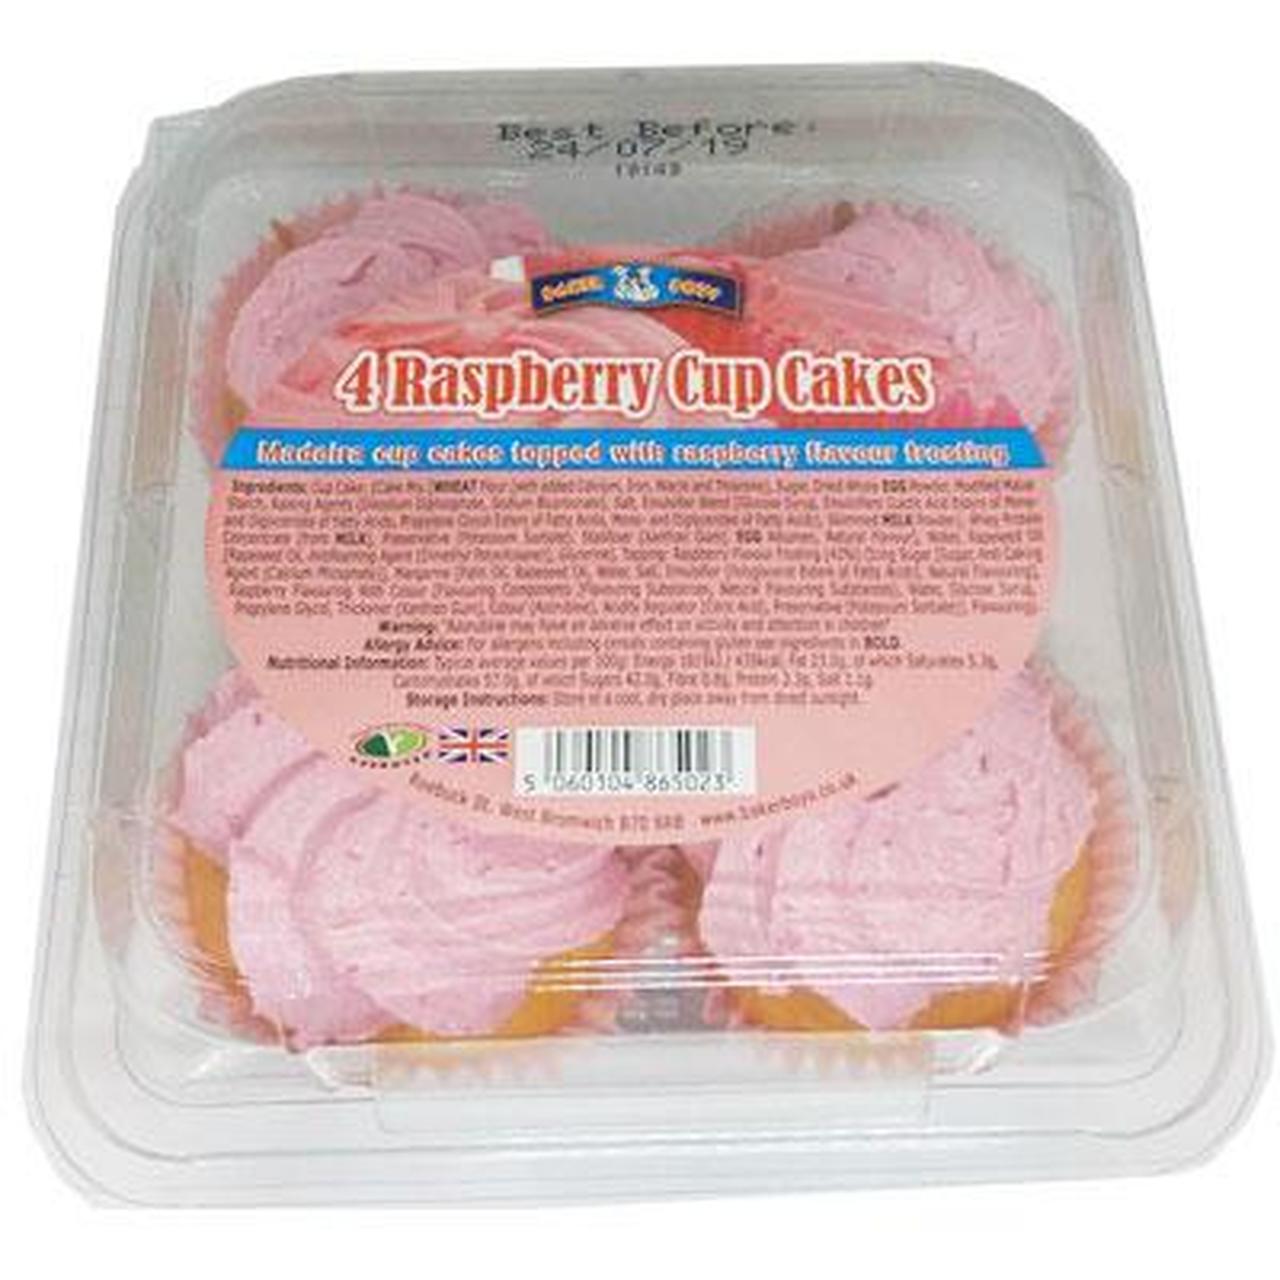 Baker Boys 4 Raspberry Cup Cakes (Jan - Nov 23) RRP £1.49 CLEARANCE XL 89p or 2 for £1.50